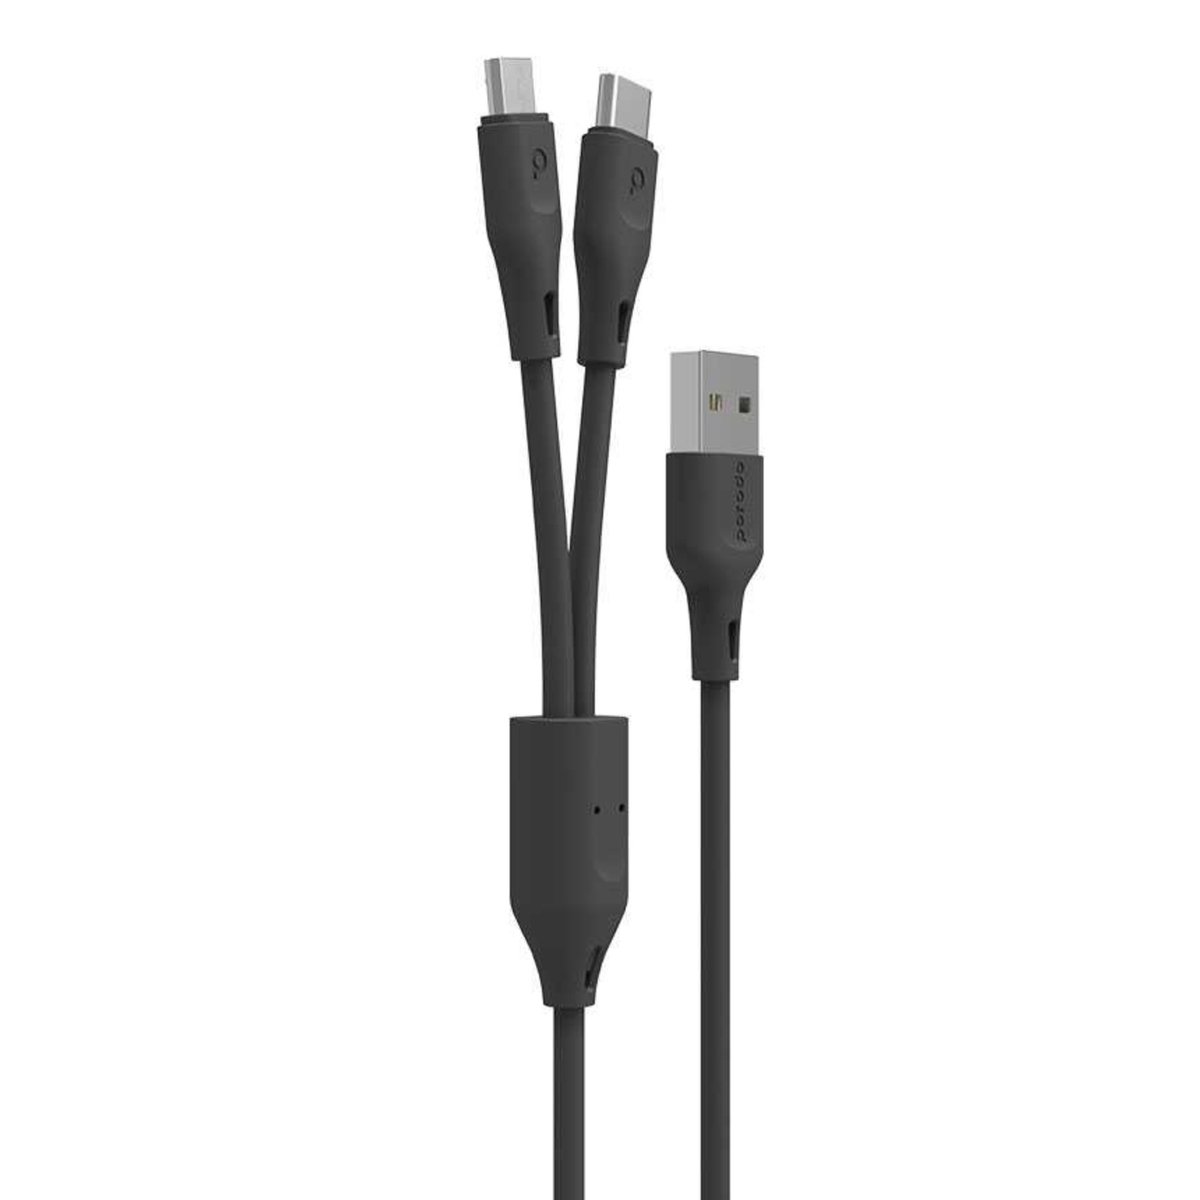 Porodo 3 in 1 Fast Charge Cable PD-21CM-BK Black